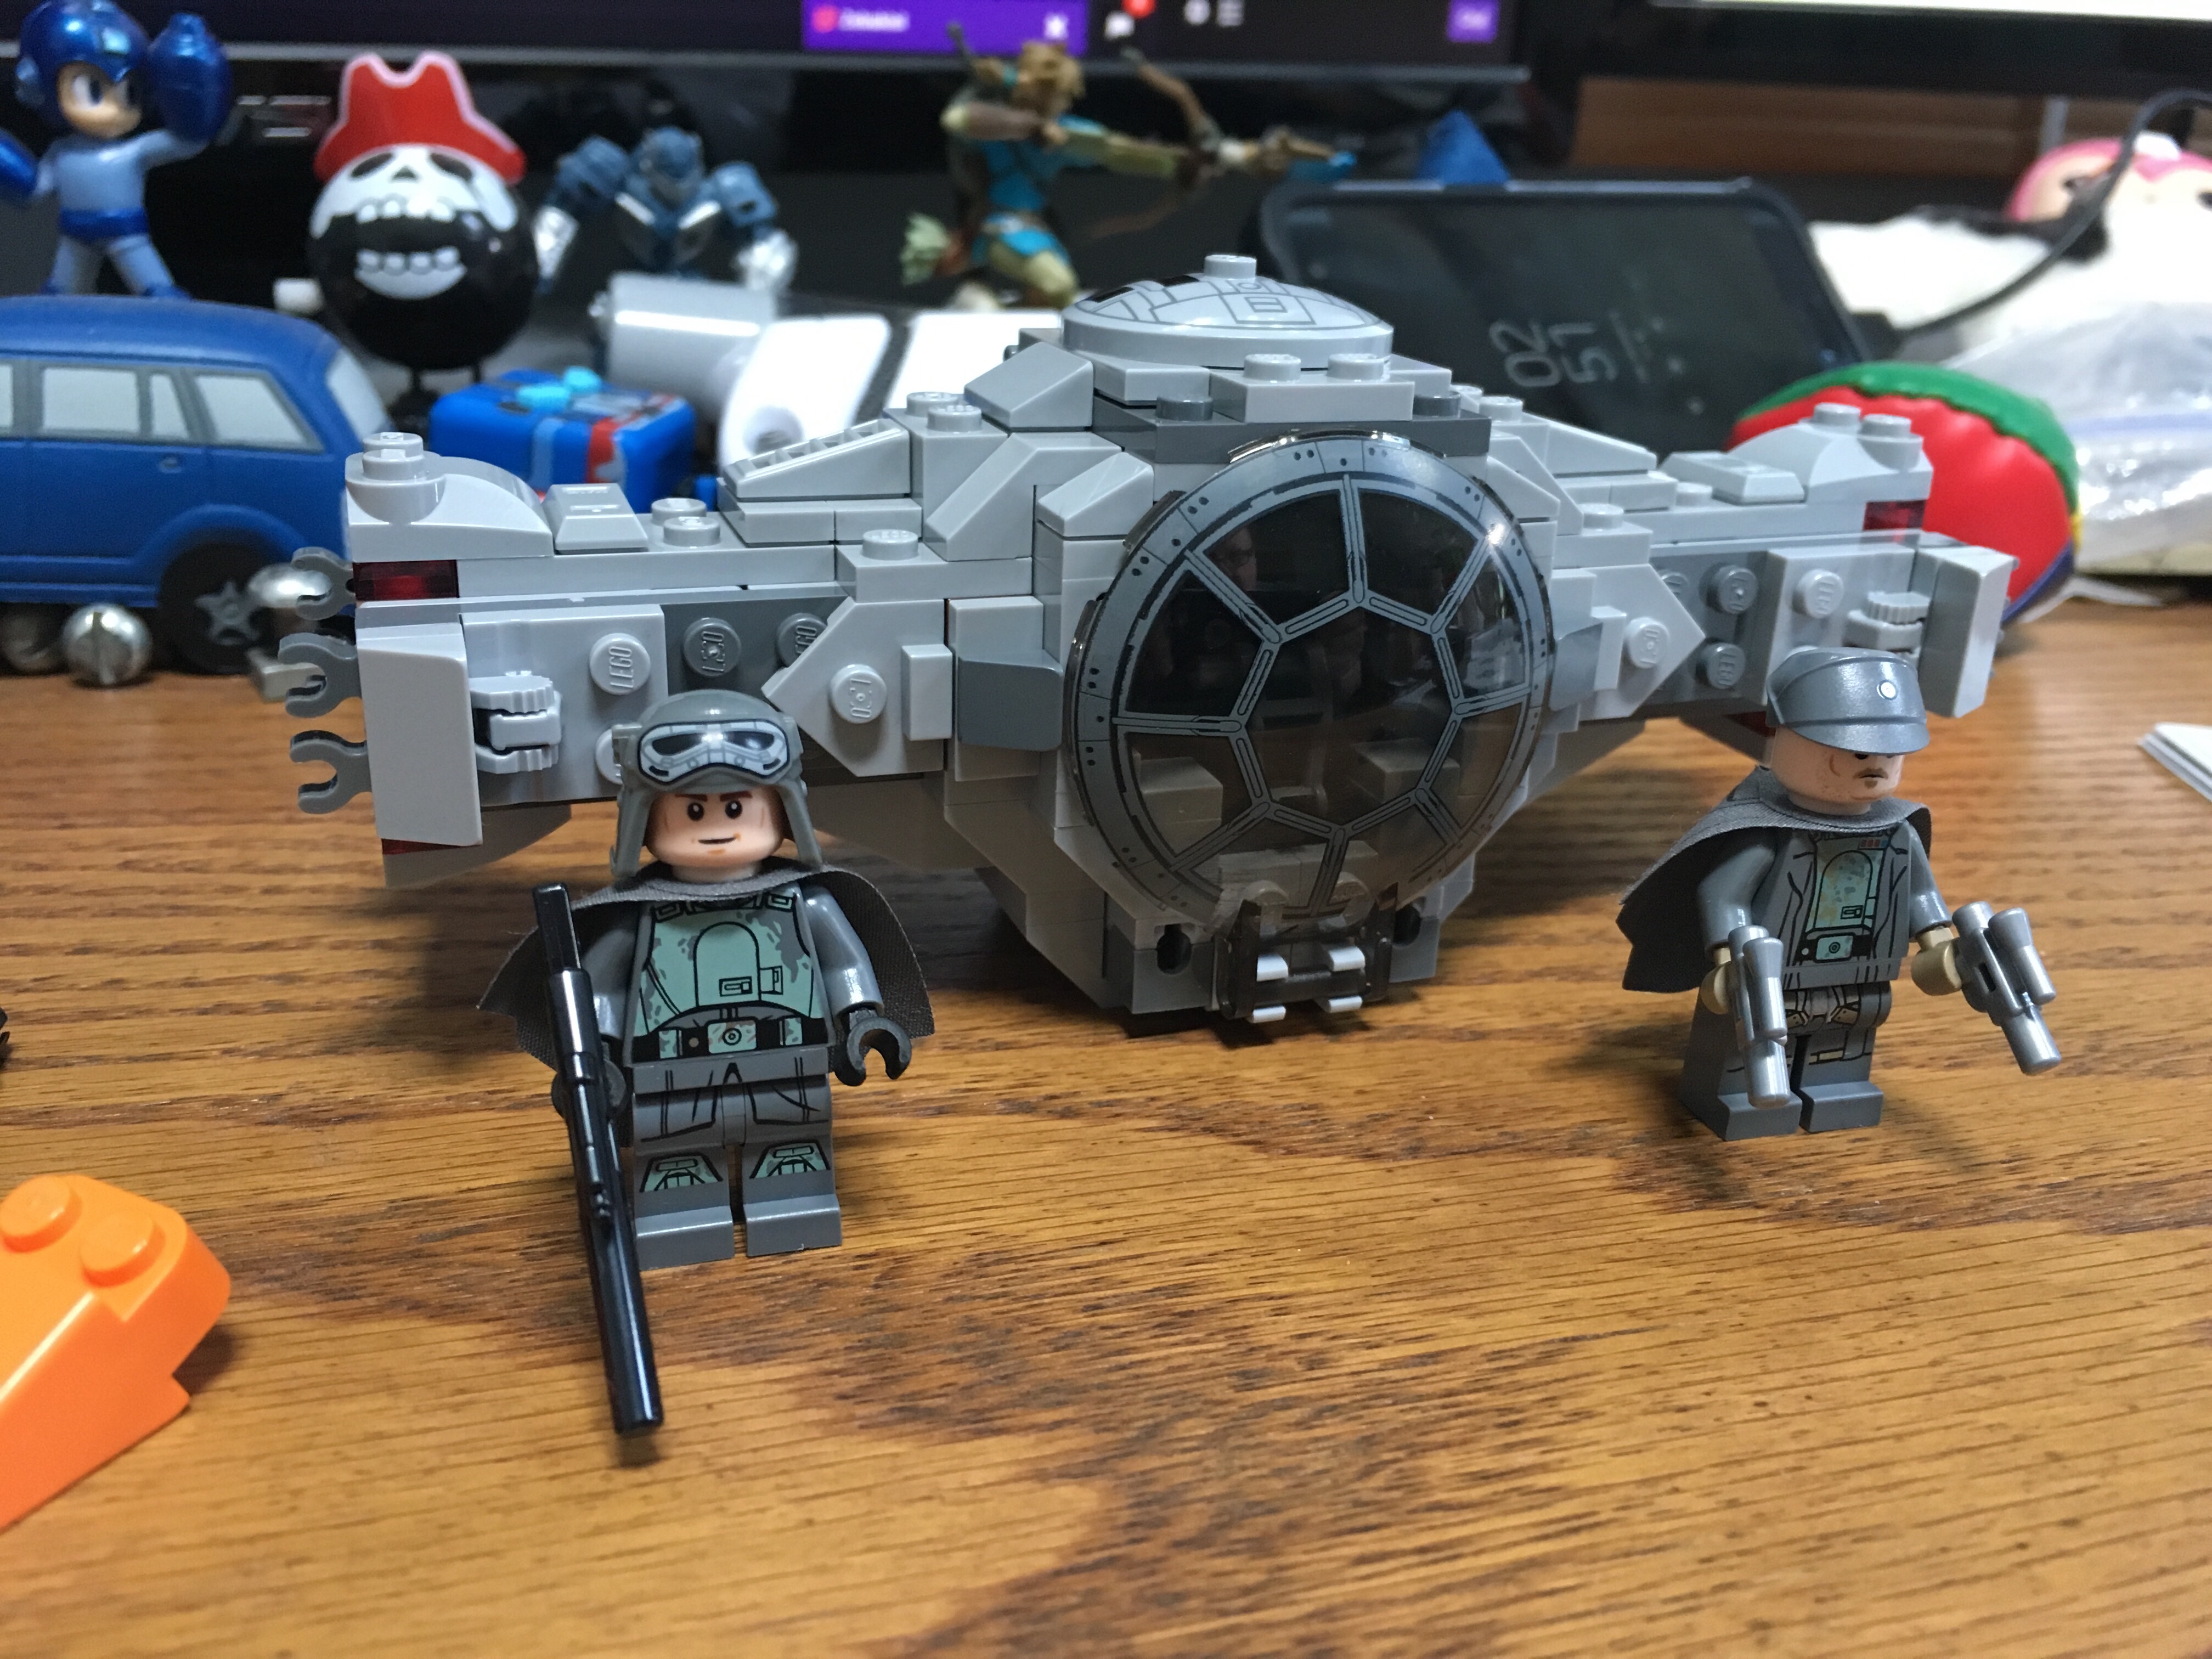 Partially assembled LEGO Tie Fighter